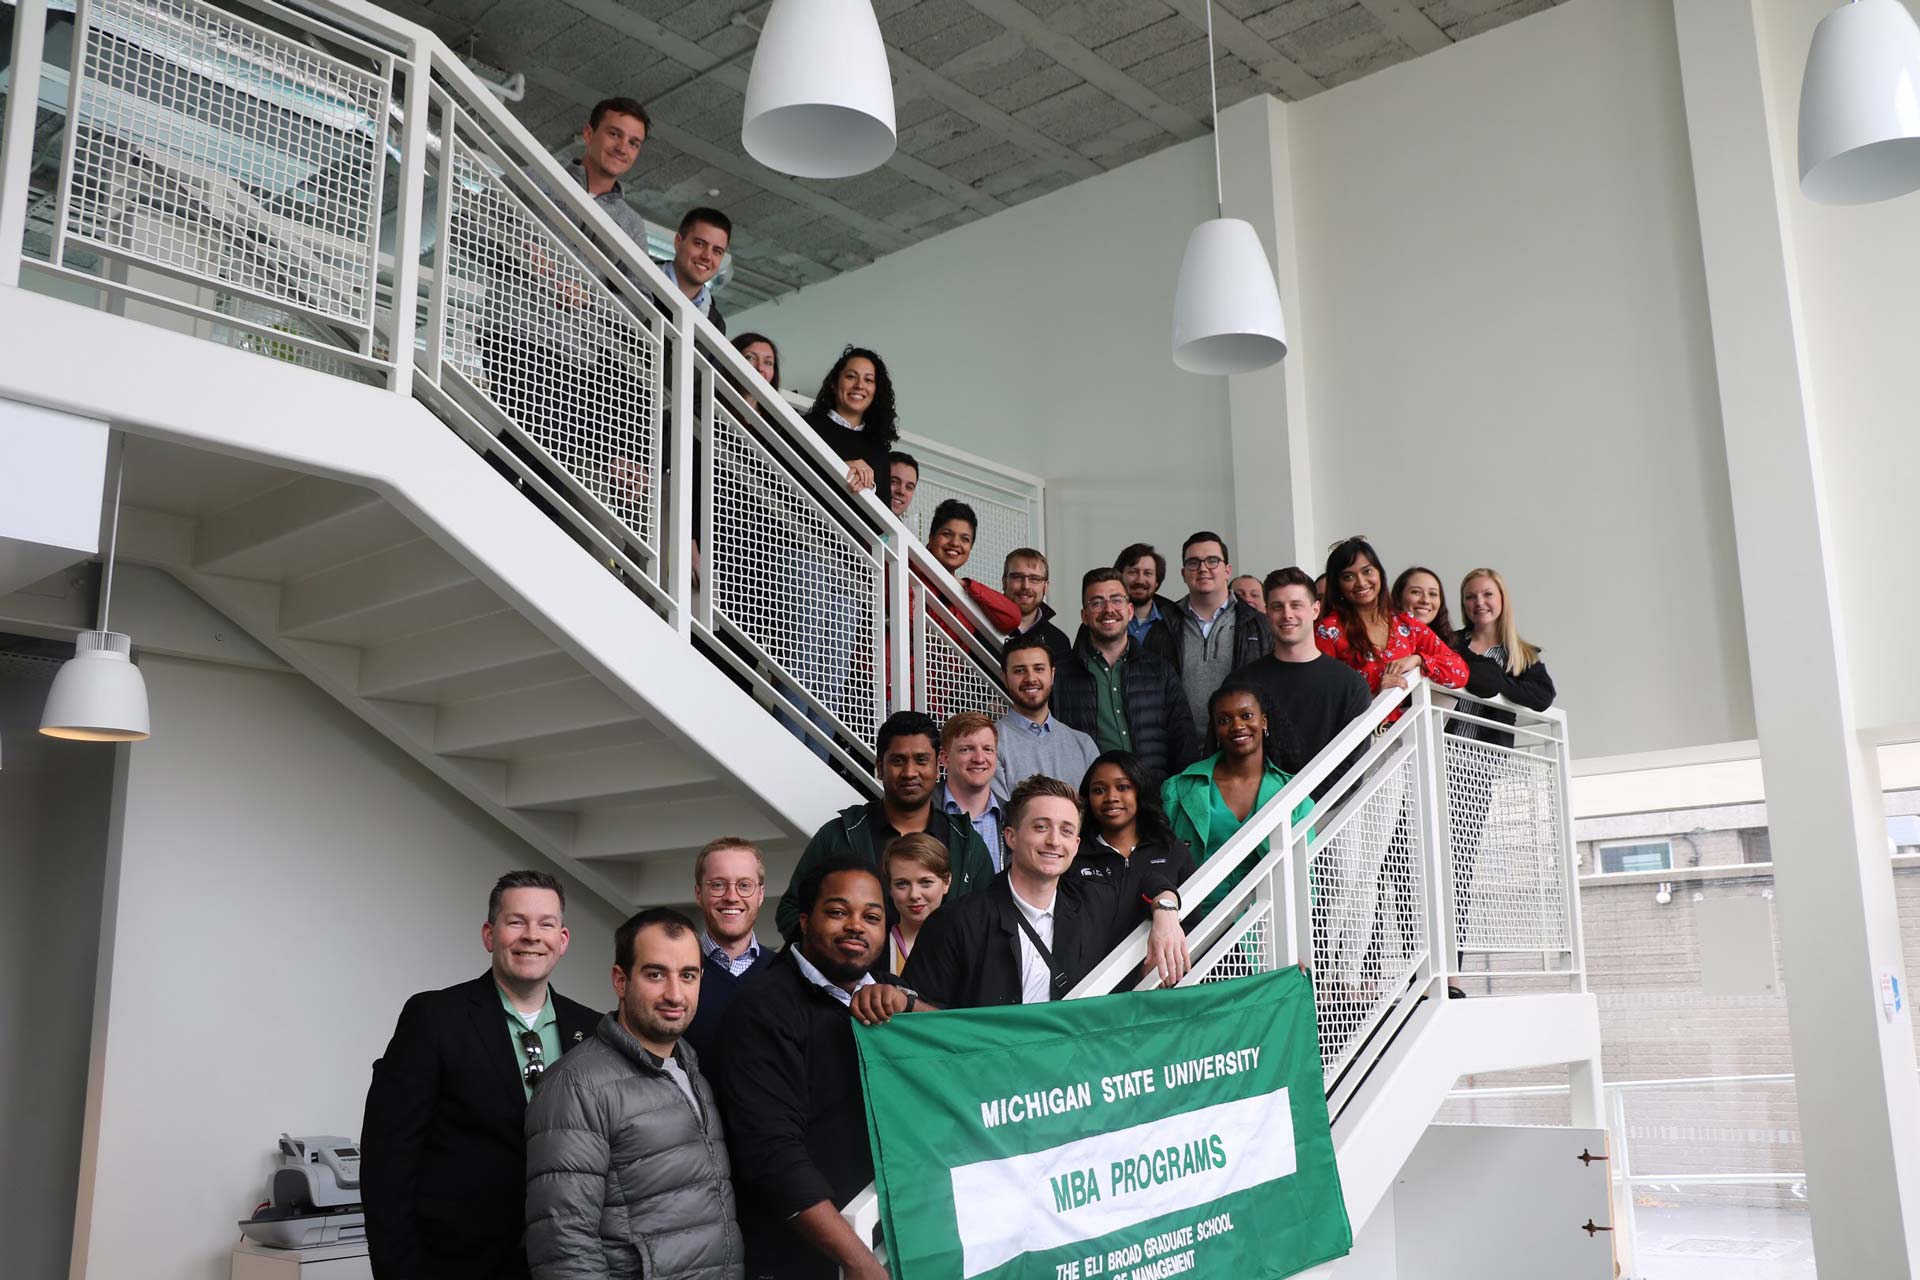 Group of full-time MBA students from the MSU Broad College of Business stand on stairs holding banner